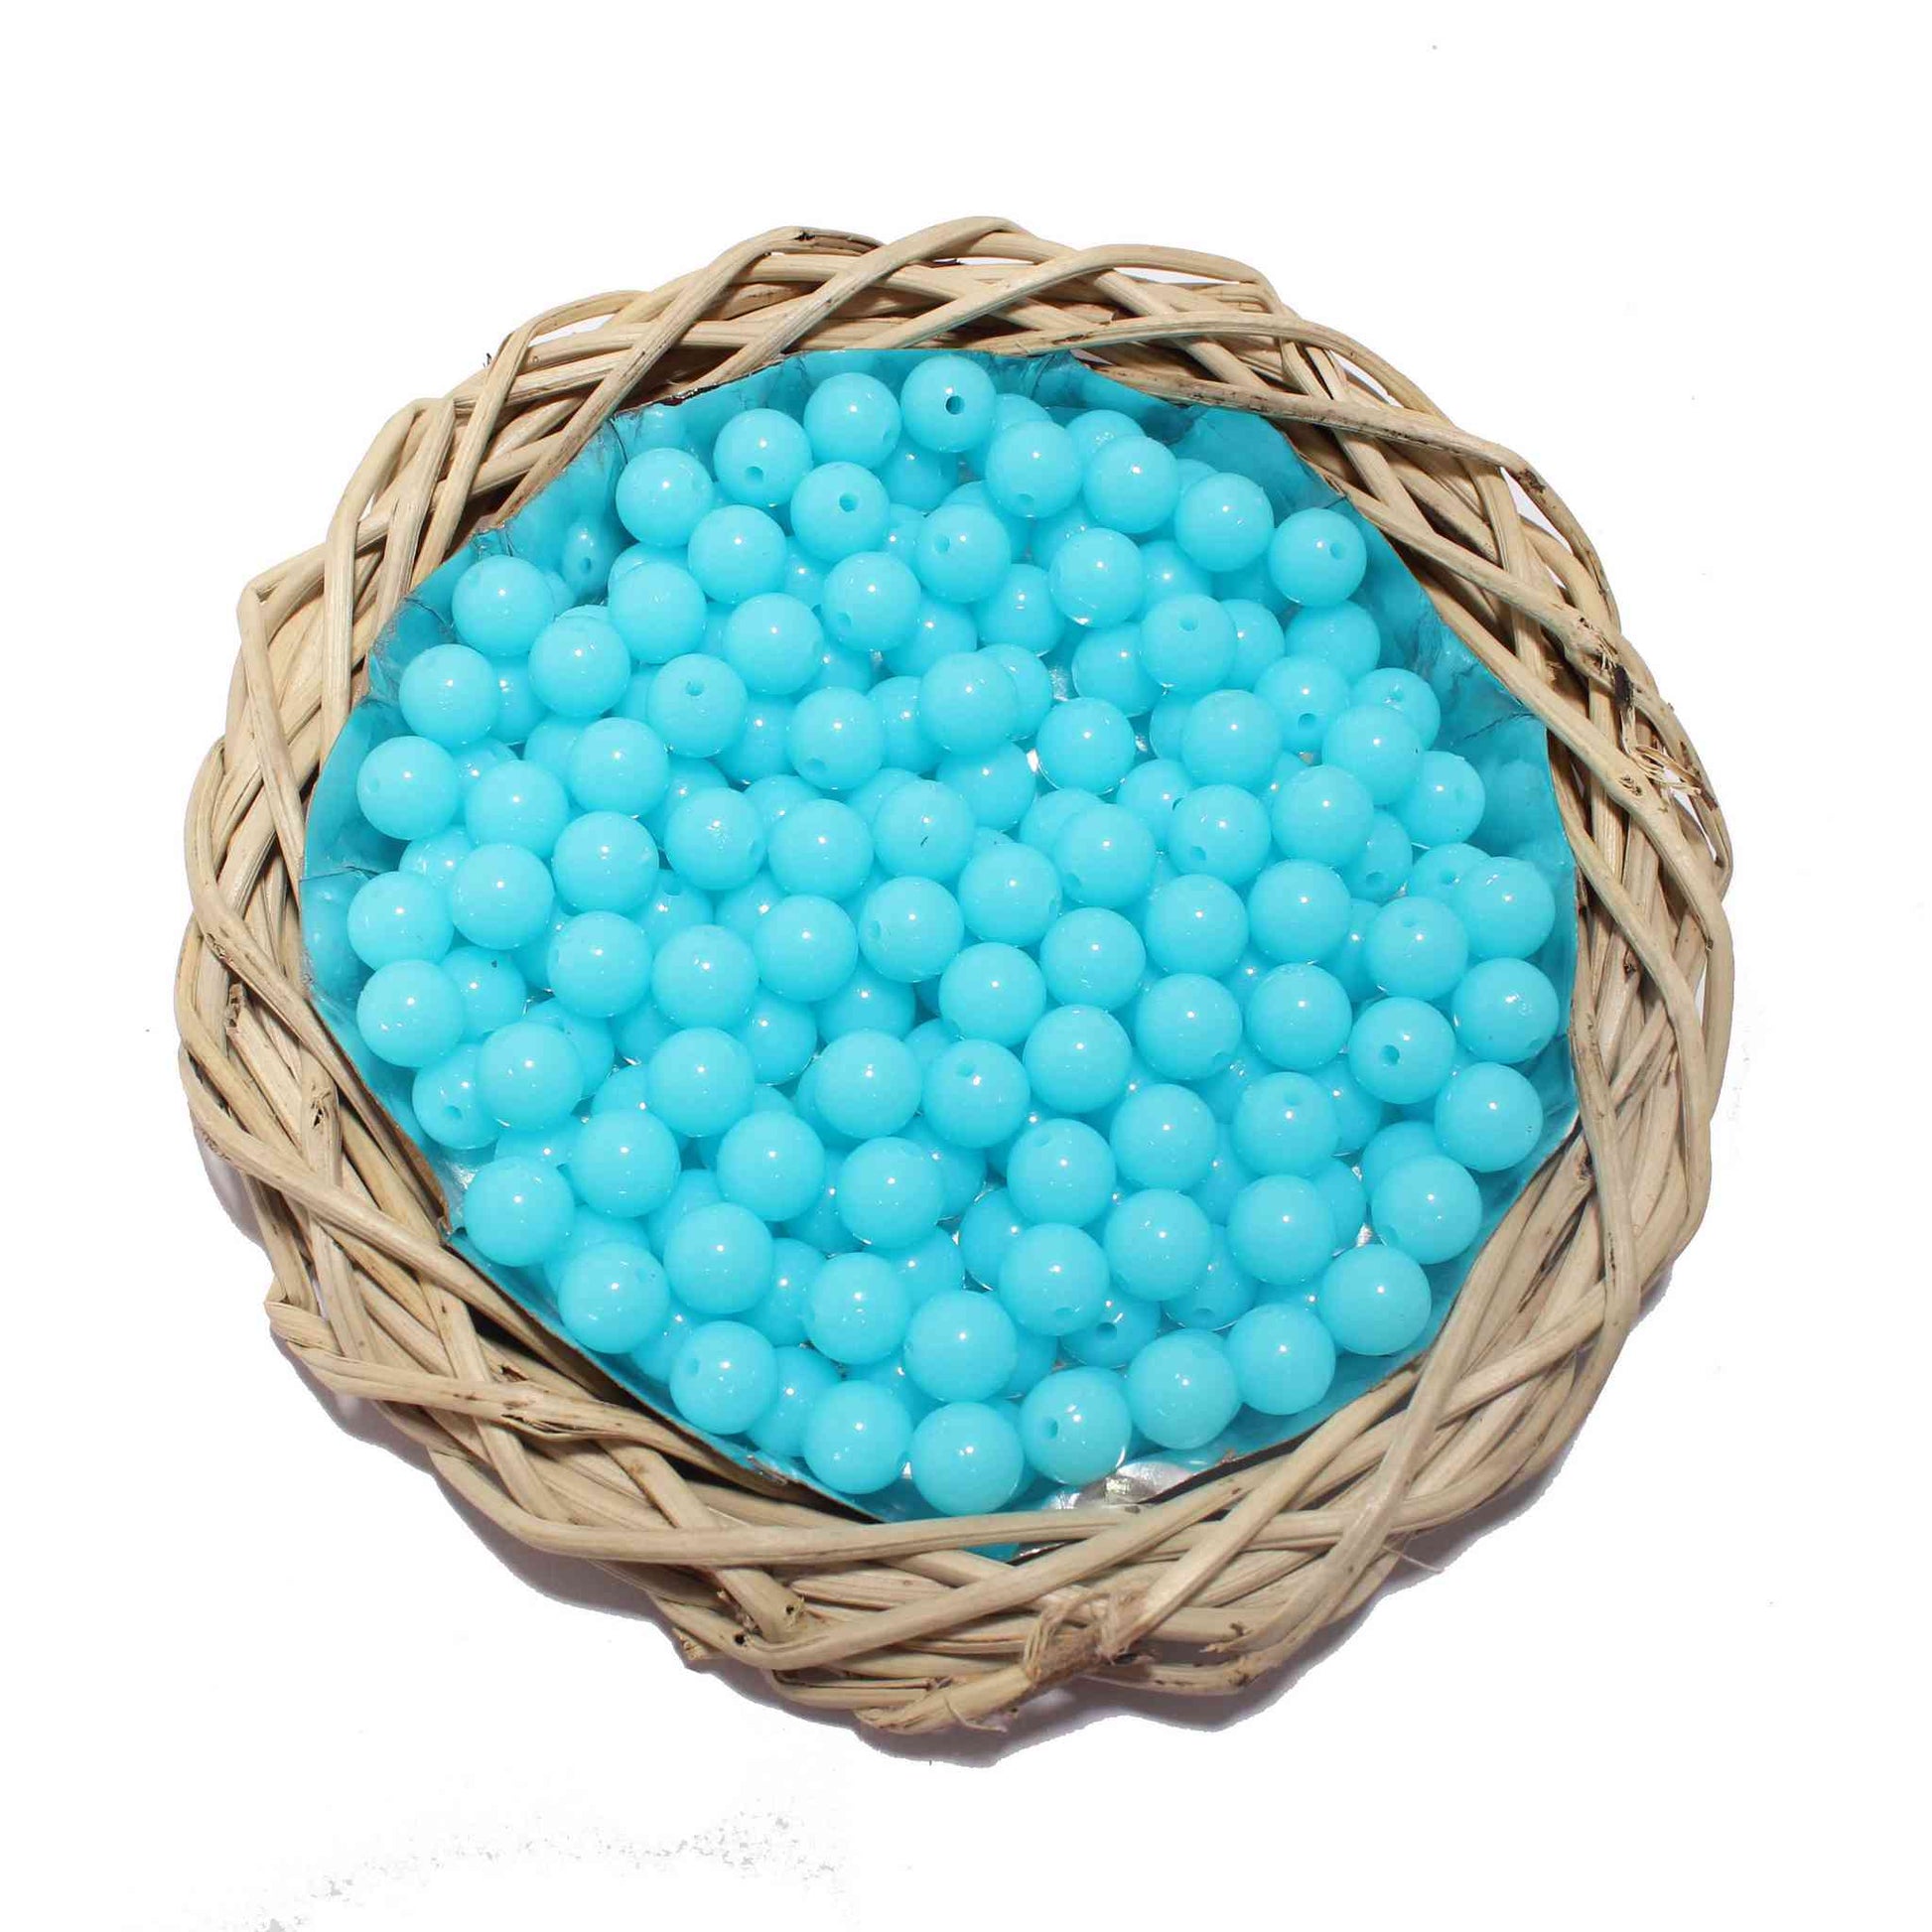 Premium quality Round Glass Beads for DIY Craft, Trousseau Packing or Decoration - Design 734, Light Blue - Indian Petals